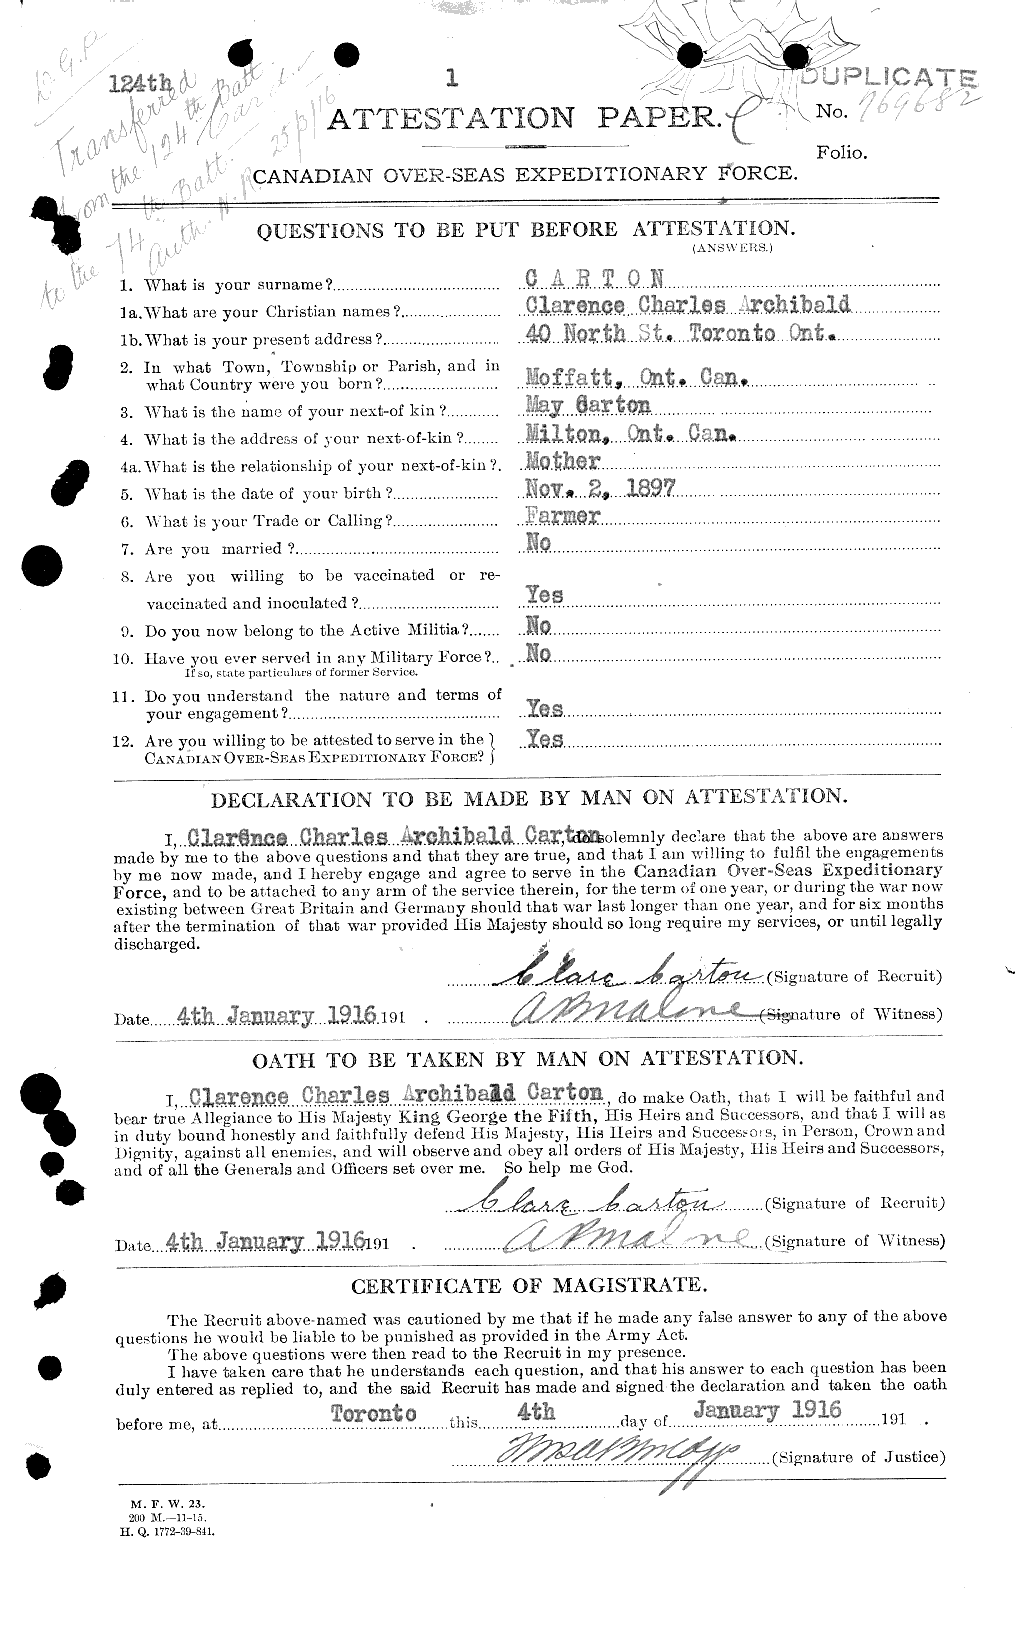 Personnel Records of the First World War - CEF 012538a